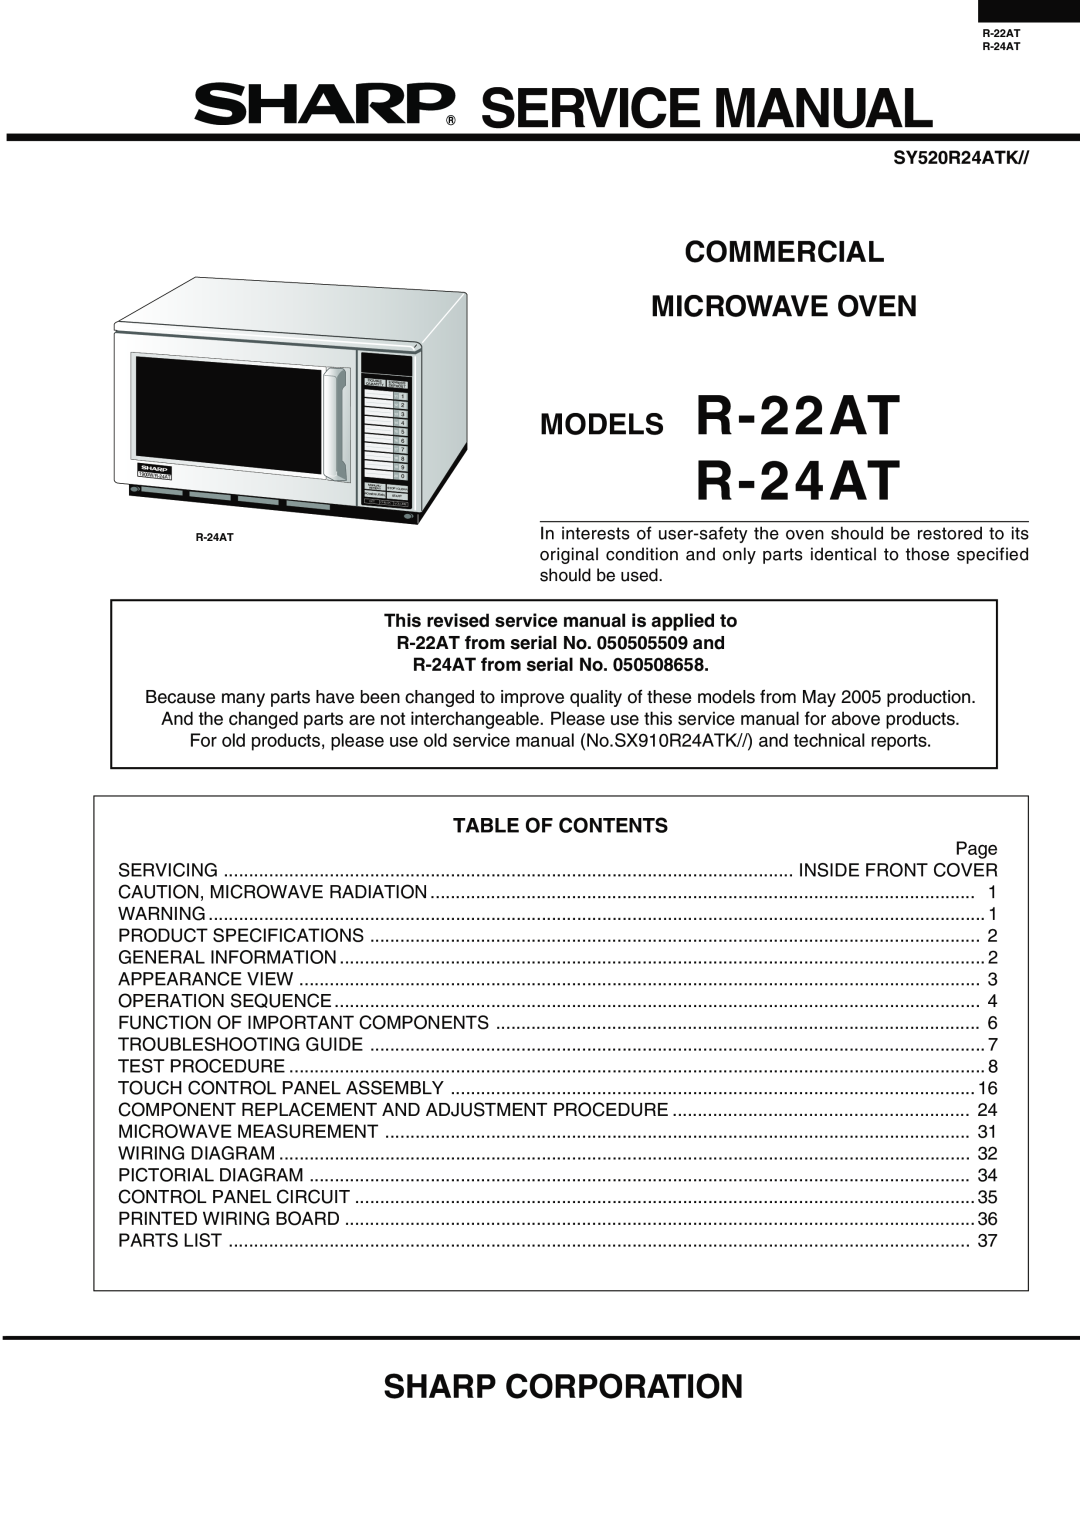 Sharp service manual Sharp Corporation, Commercial Microwave Oven, MODELS R-22AT, Table Of Contents, SY520R24ATK 